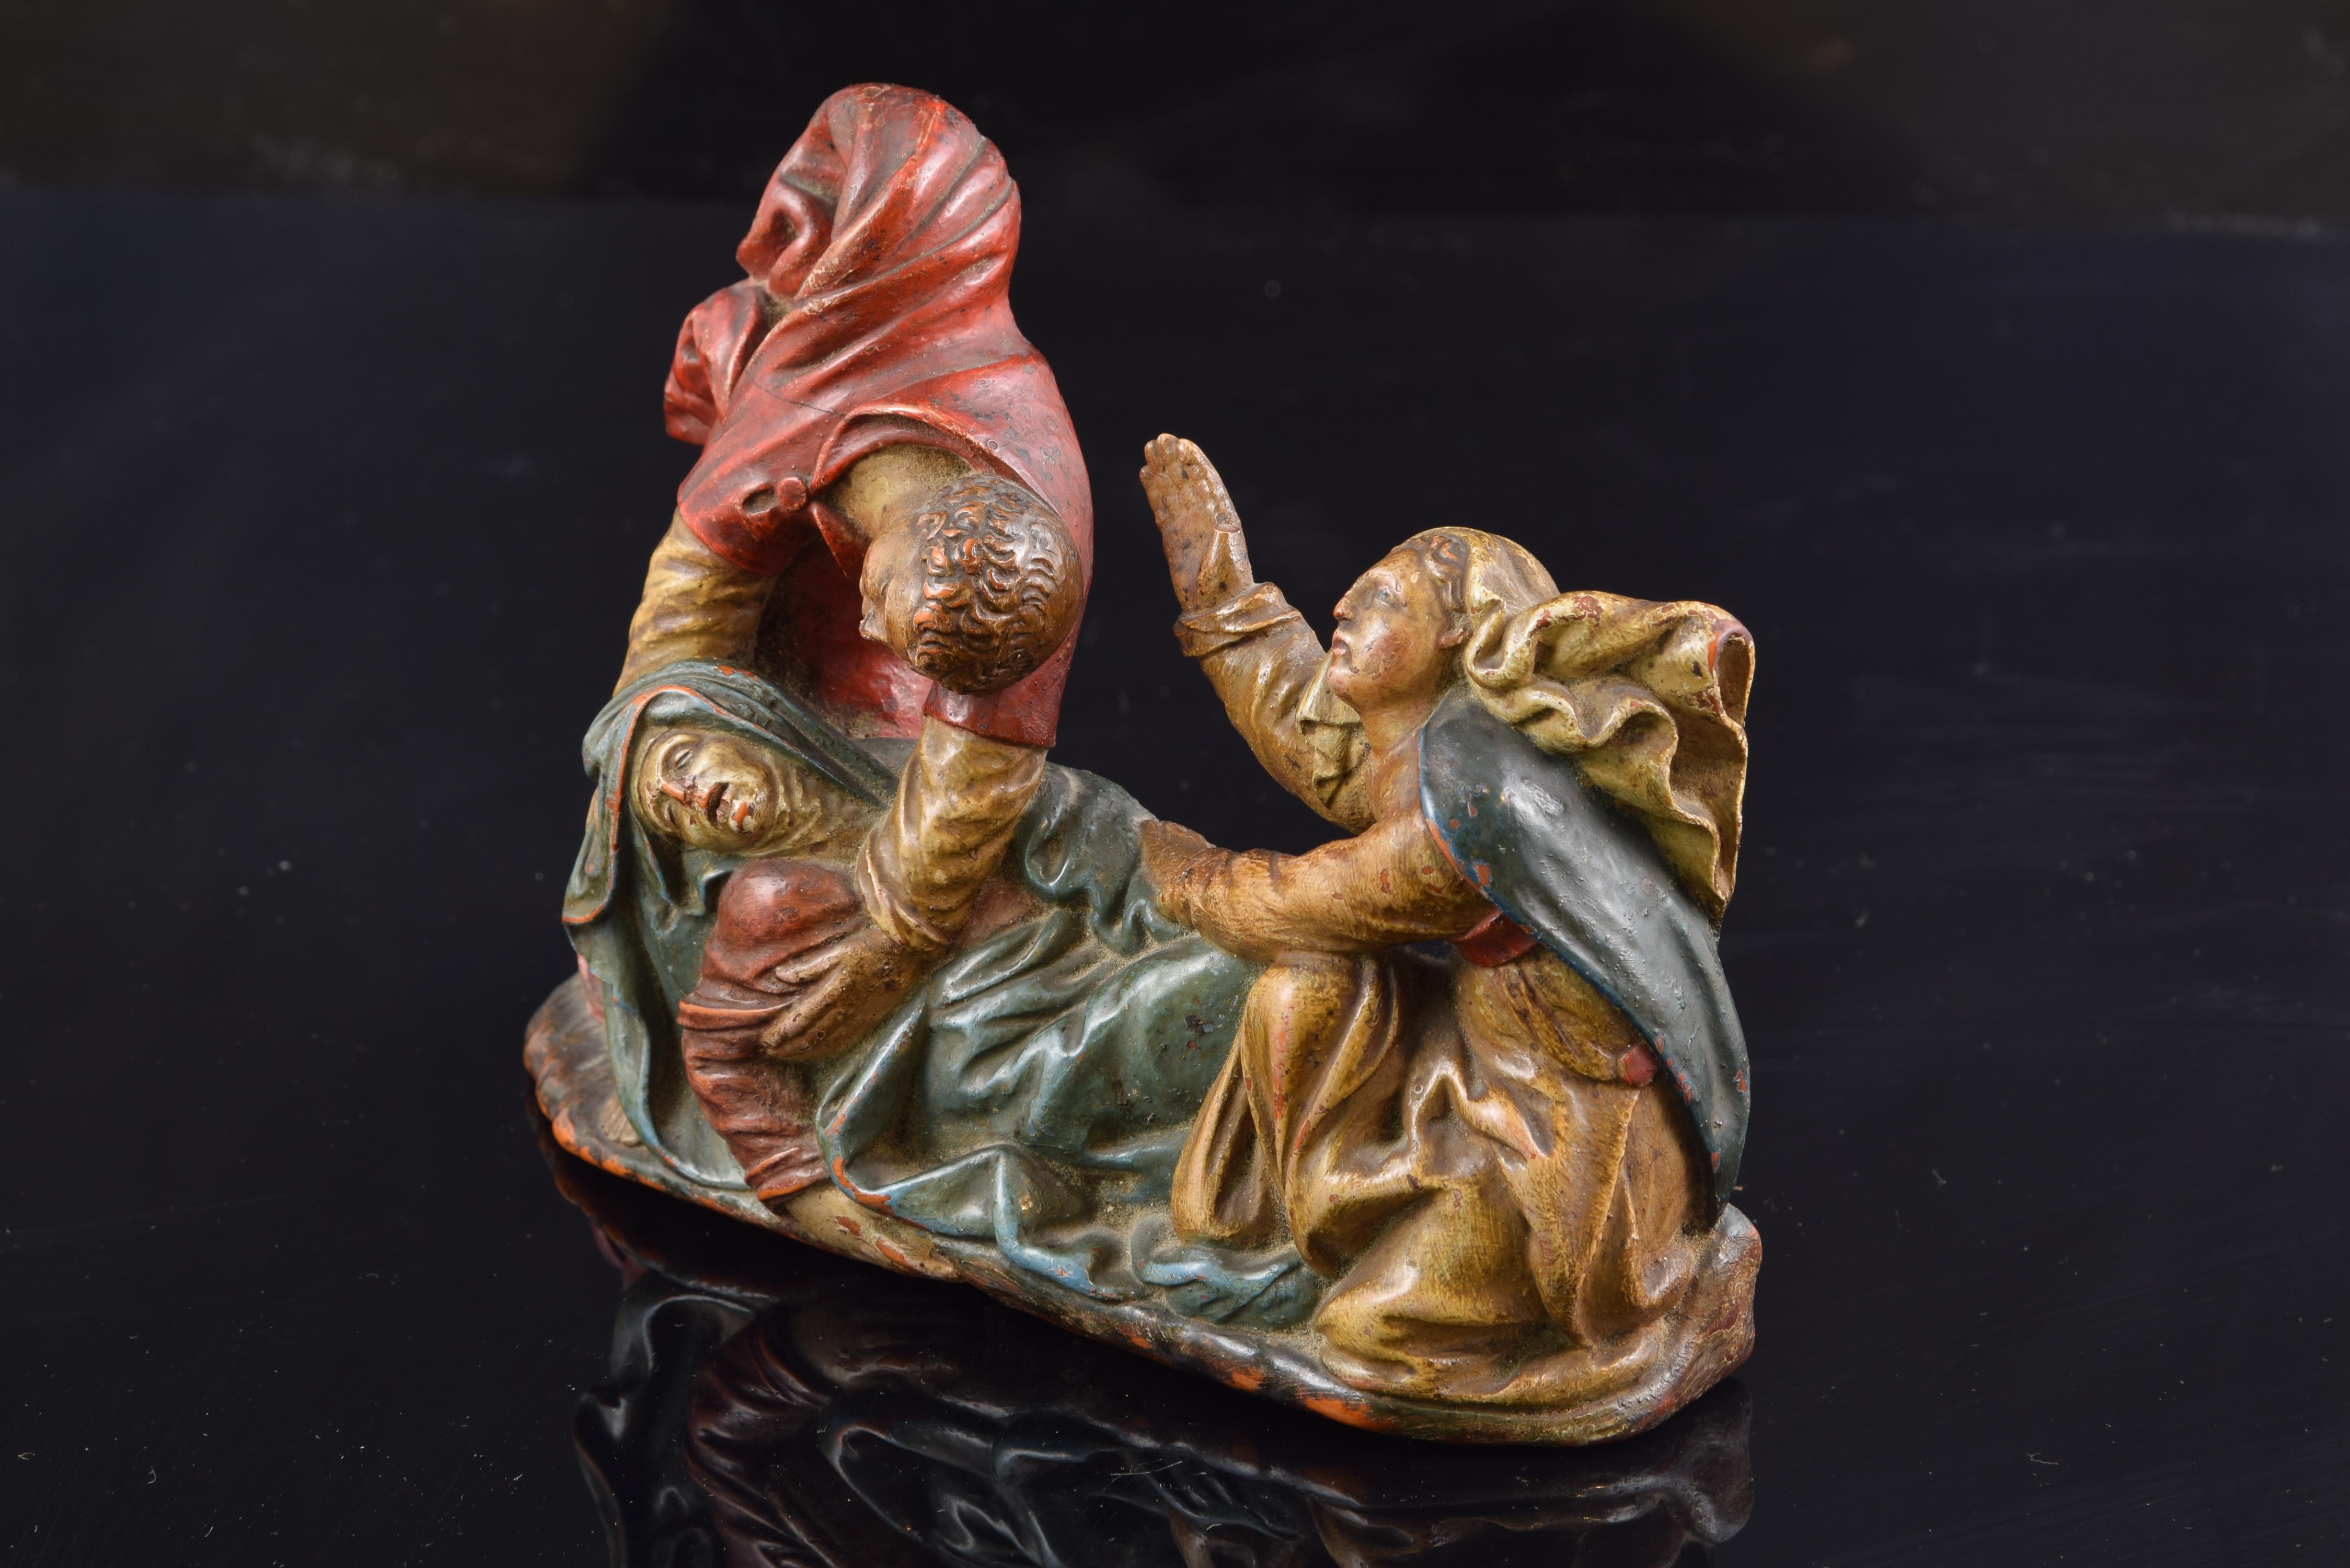 Sculptural ensemble. Polychrome boxwood. Spanishschool, 16th century. 
Polychrome boxwood carving showing a fragment ofa Catholic religious scene with three charactersdressed in robes and cloaks. In the lower area, lyingdown and passed out, is the